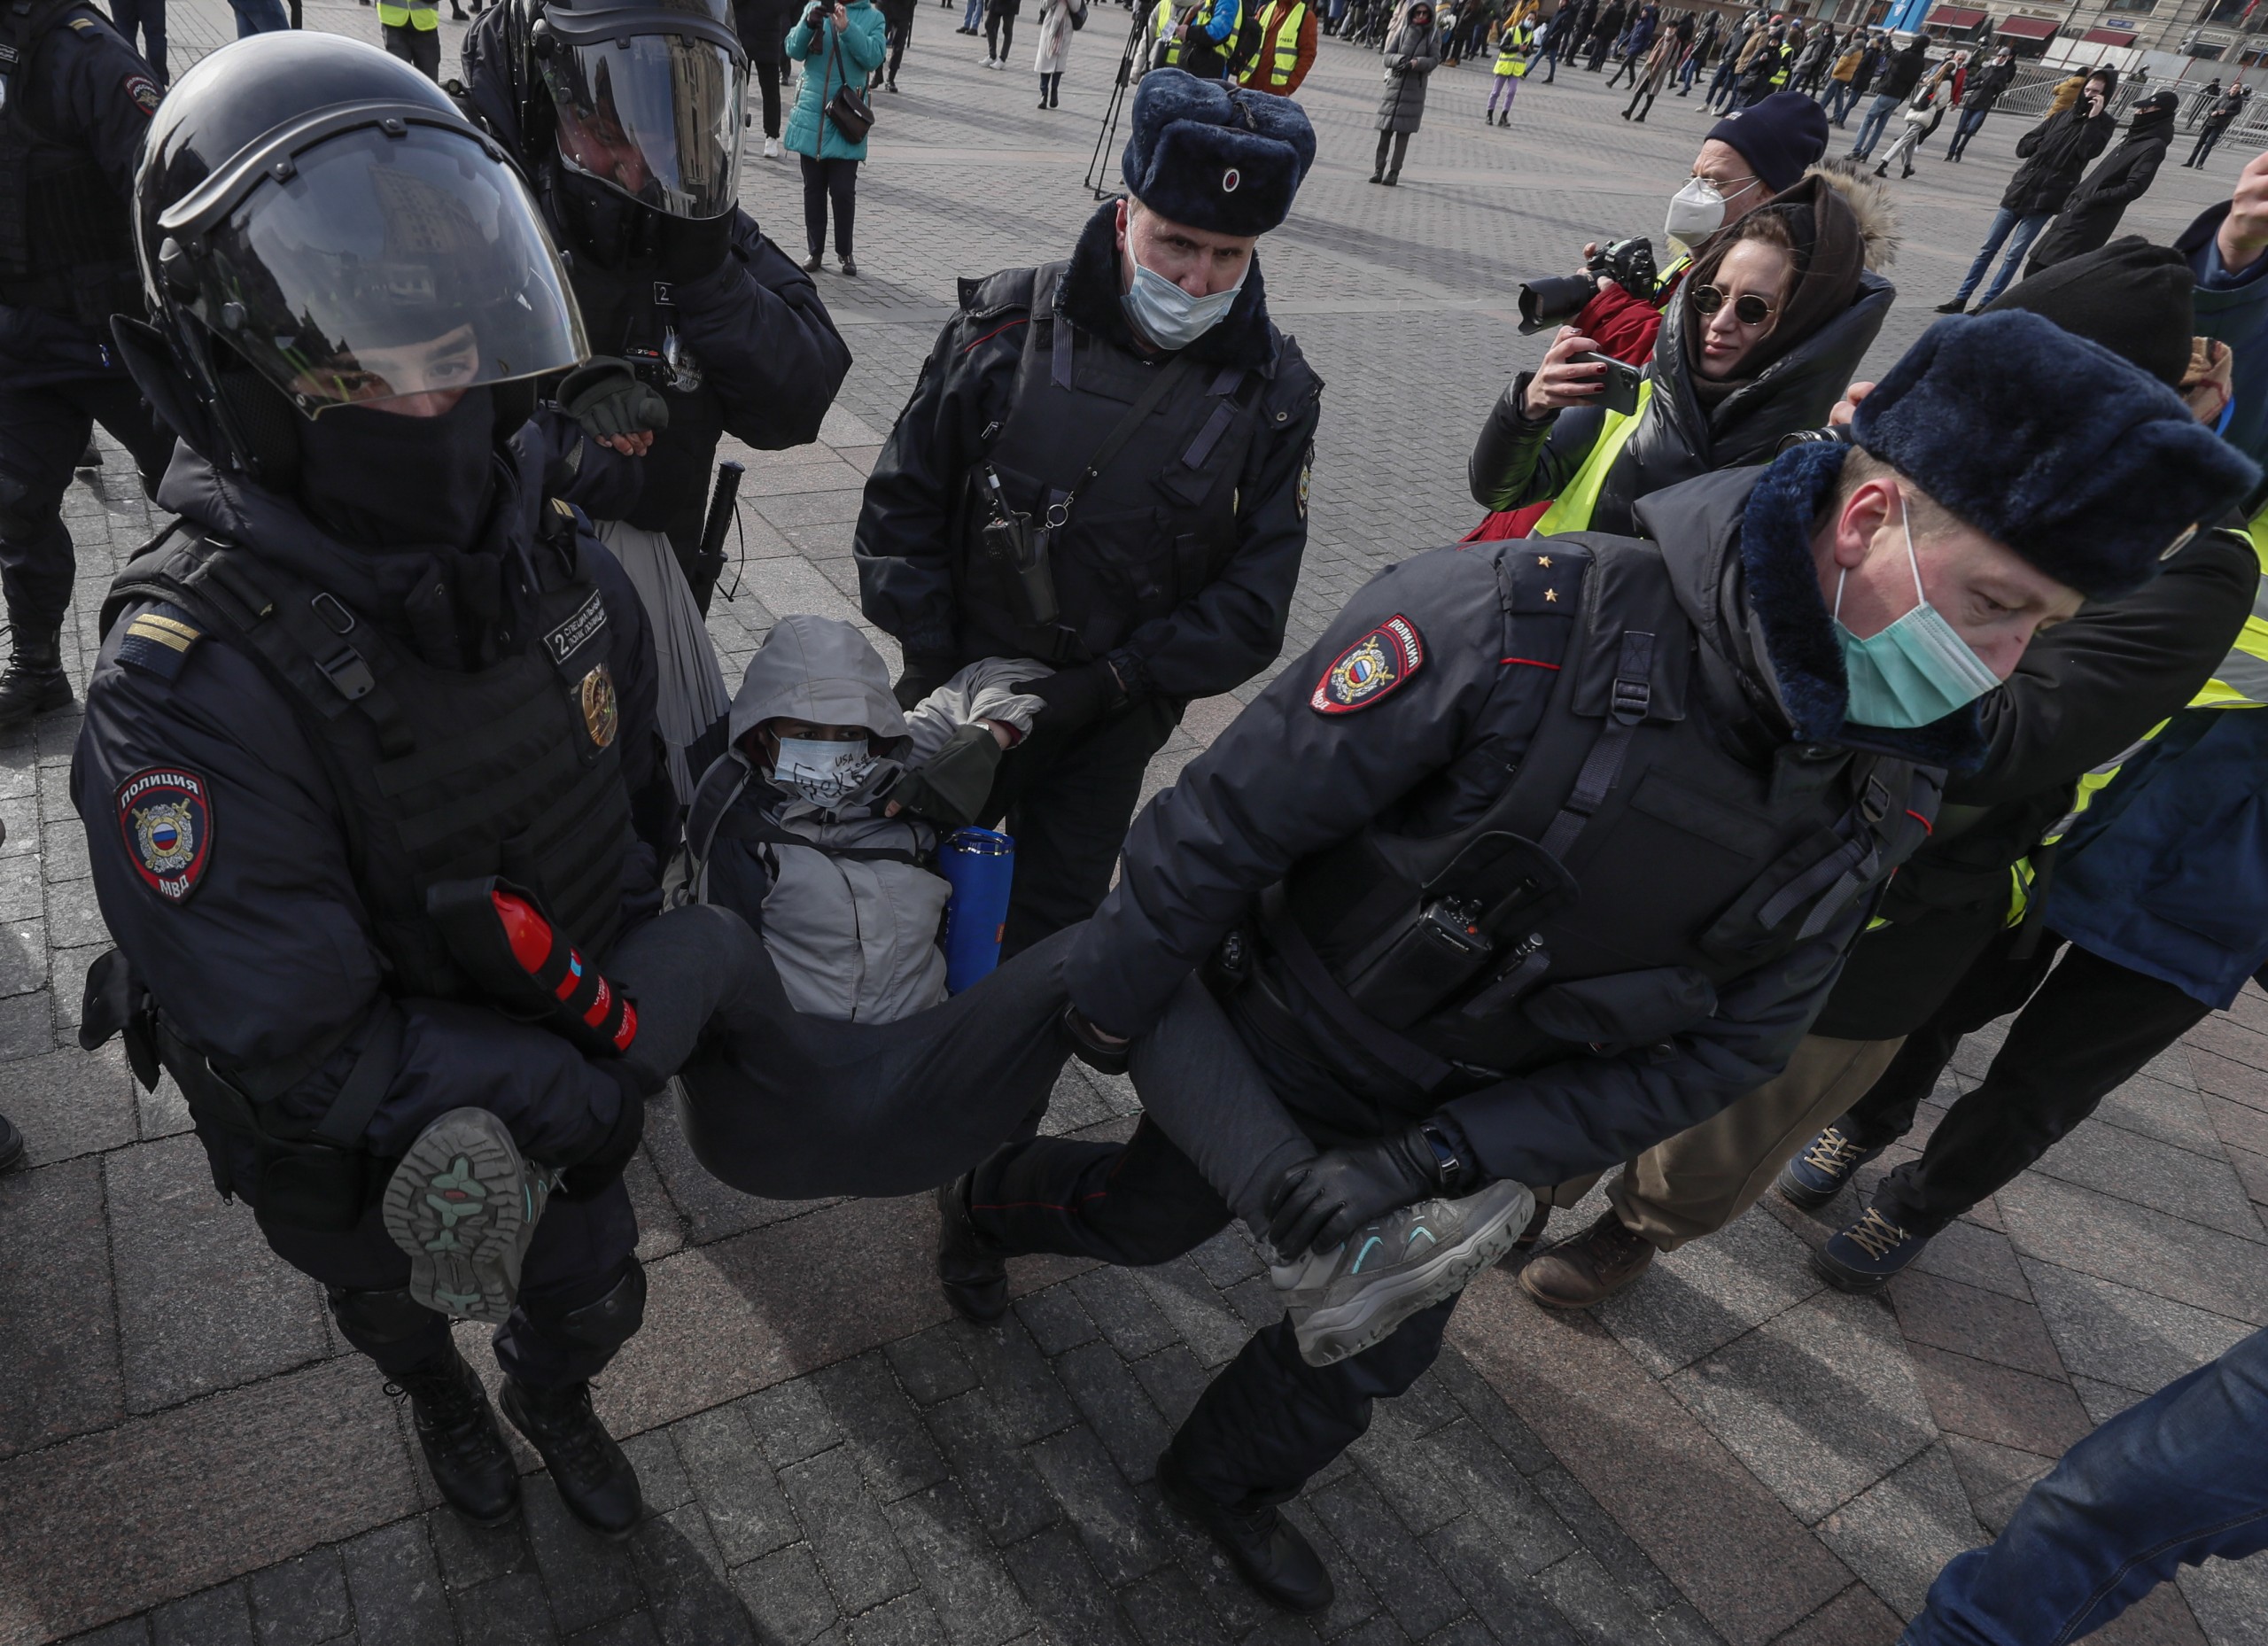 epa09805141 Russian policemen detain a participant in an unauthorized rally against the Russian invasion of Ukraine, in downtown Moscow, Russia, 06 March 2022. Kremlin critic Alexei Navalny on 04 March called on Russians worldwide to take to the streets on 06 March and protest against Putin's military operation in Ukraine. According to independent Russian human rights group OVD-Info, hundreds of people were arrested in protests throughout major Russian cities on 06 March.  EPA/YURI KOCHETKOV